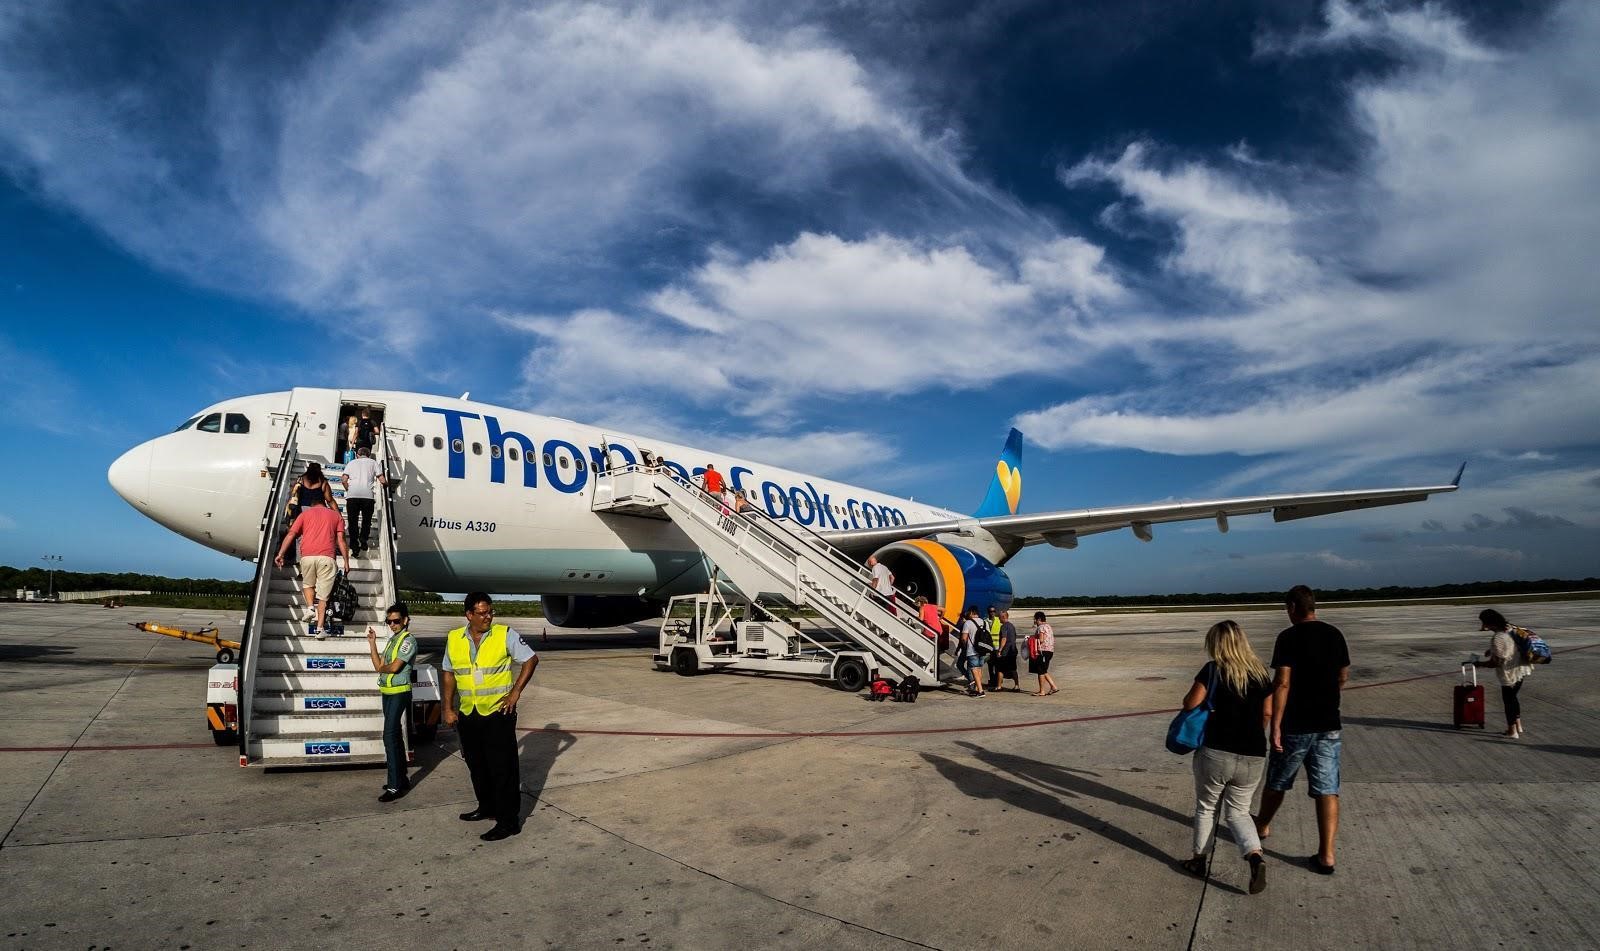 People board a Thomas Cook aeroplane from the tarmac at Jardines del Rey Airport, Cayo Coco, Cuba. IMG: CWhatPhotos